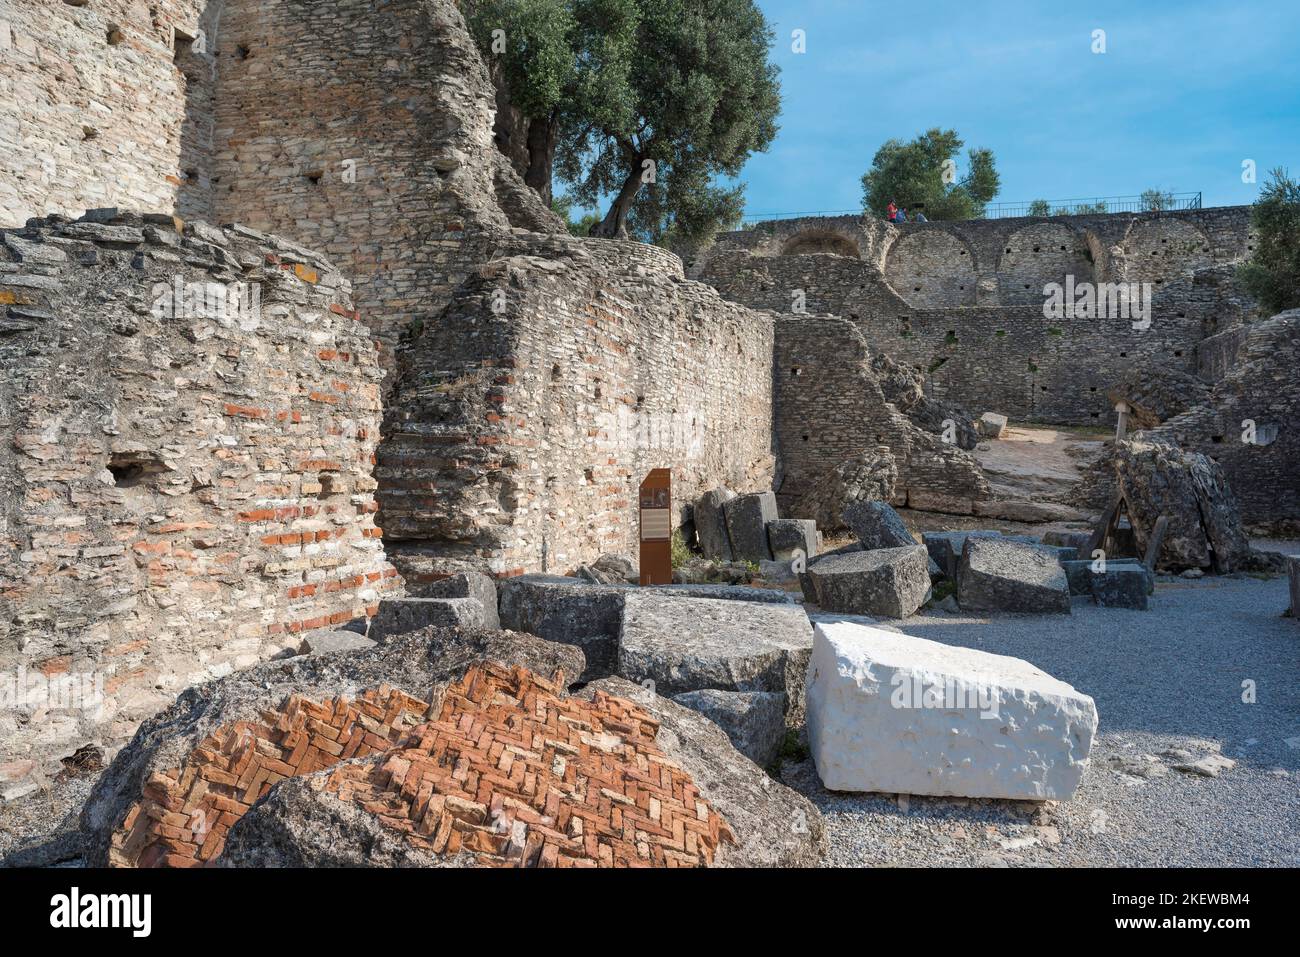 Catullus villa, view of the ruins of an old Roman building believed to be the villa of Catullus - the Grotte di Catullus, Sirmione, Lake Garda, Italy Stock Photo